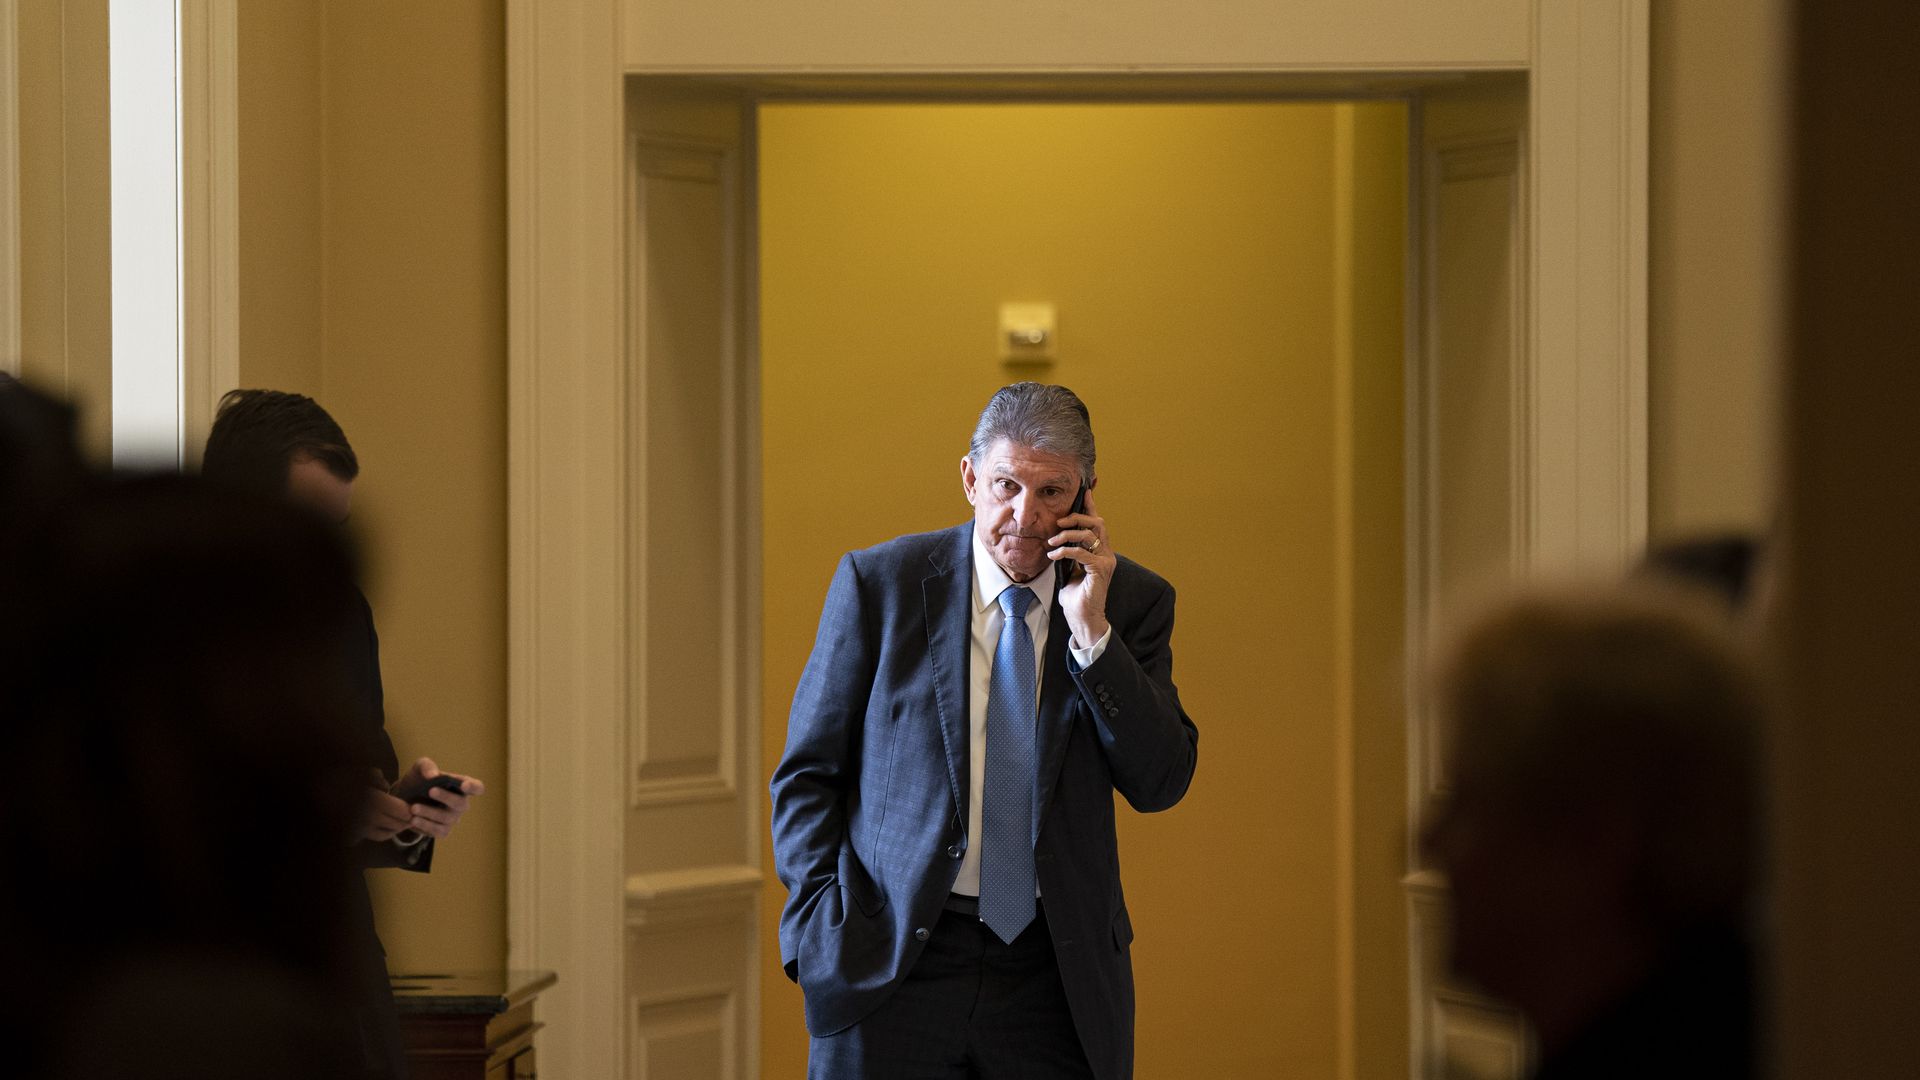 Senator Joe Manchin, a Democrat from West Virginia, speaks on the phone during the weekly Democratic caucus luncheon at the US Capitol in Washington, DC, US, on Tuesday, Nov. 29, 2022